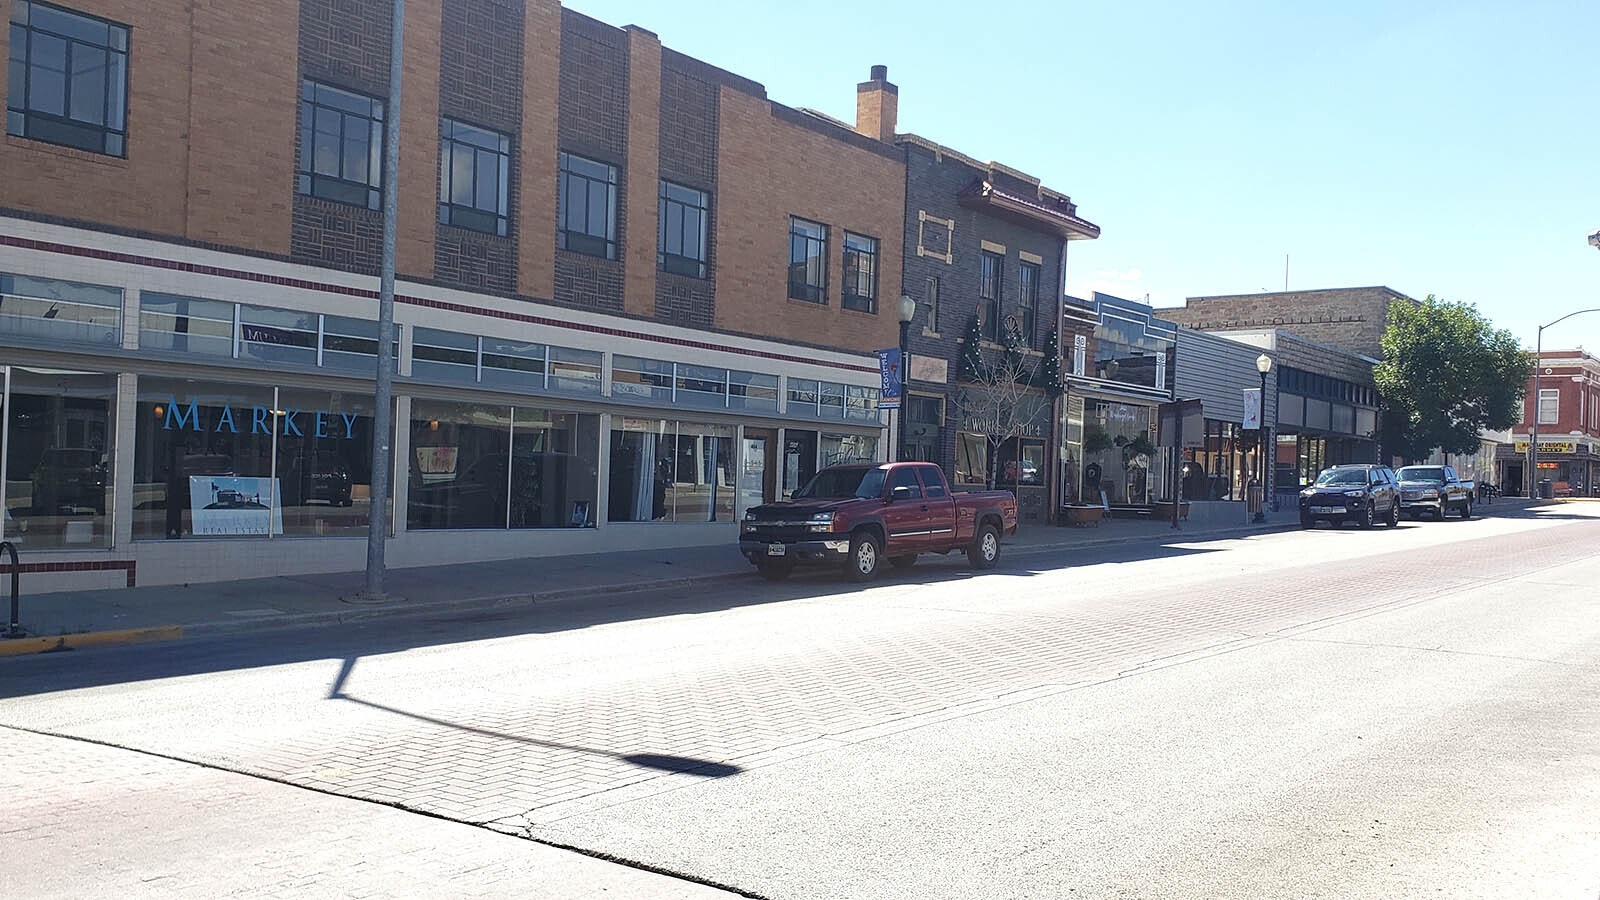 Rawlins didnt appear to have too many vacancies in its downtown streets. A mix of stores are open, ranging from coffee shops and home decor to real estate agents.